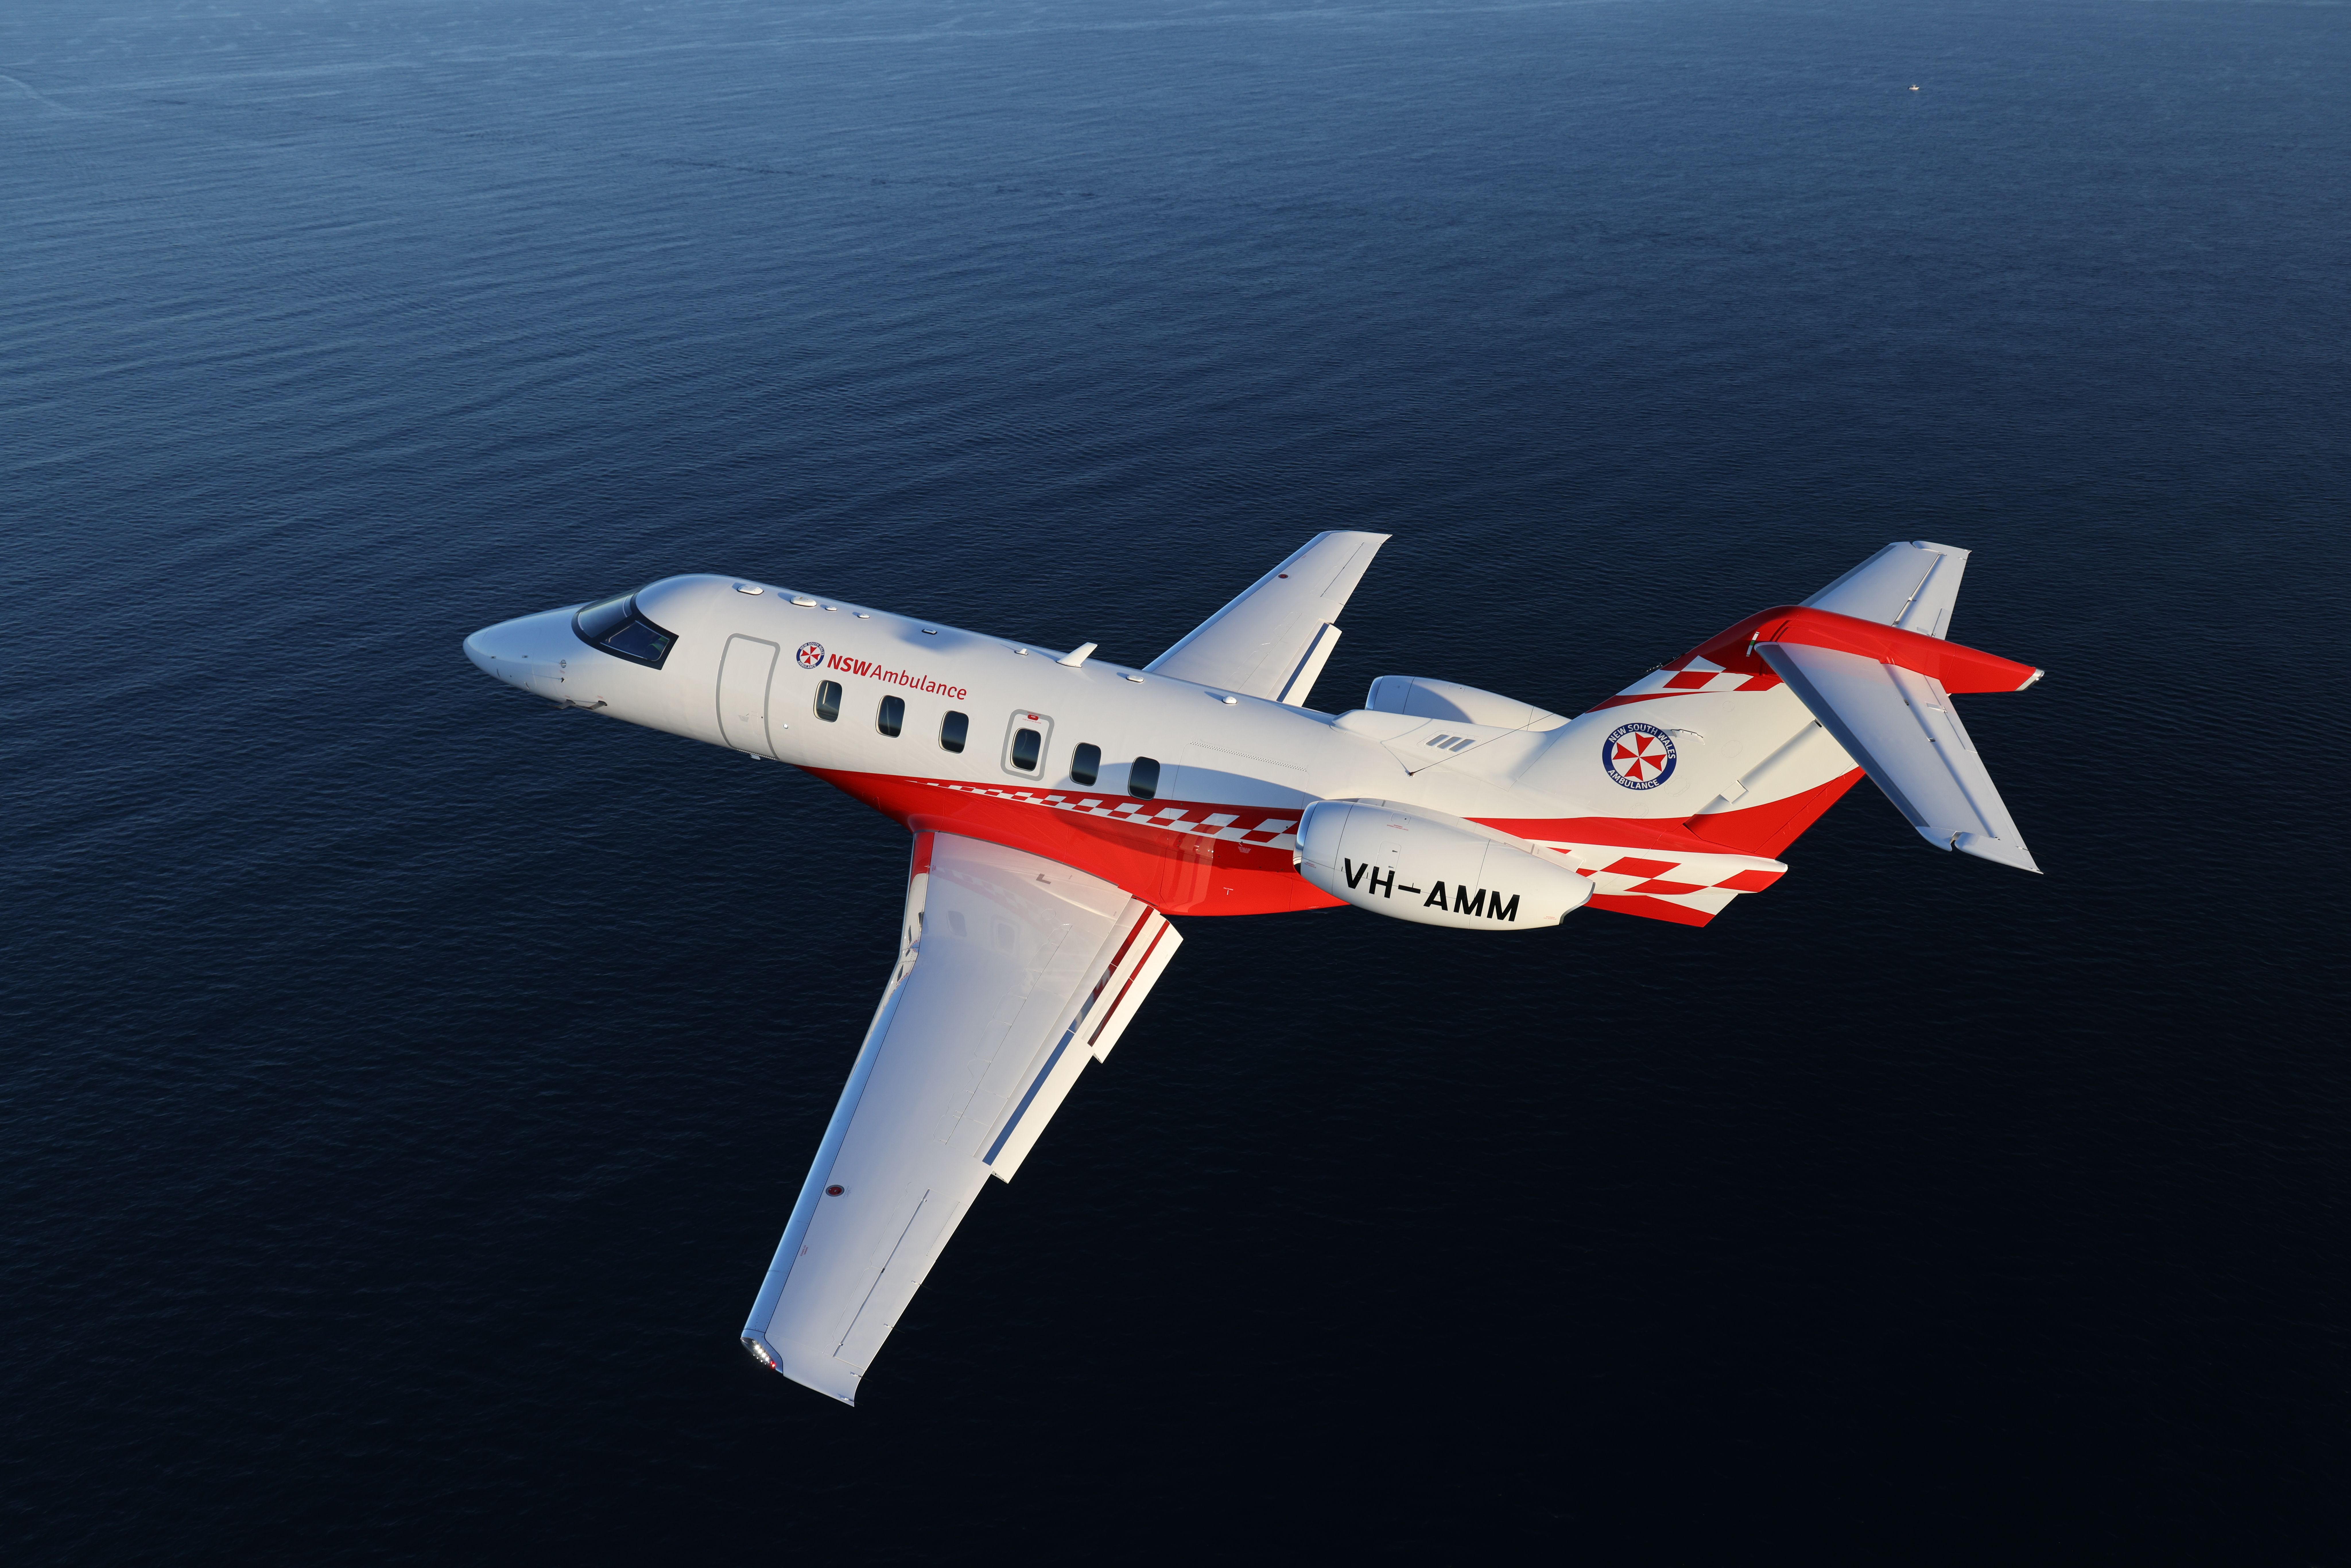 A New South Wales Ambulance Pilatus PC-24 Flying over water.